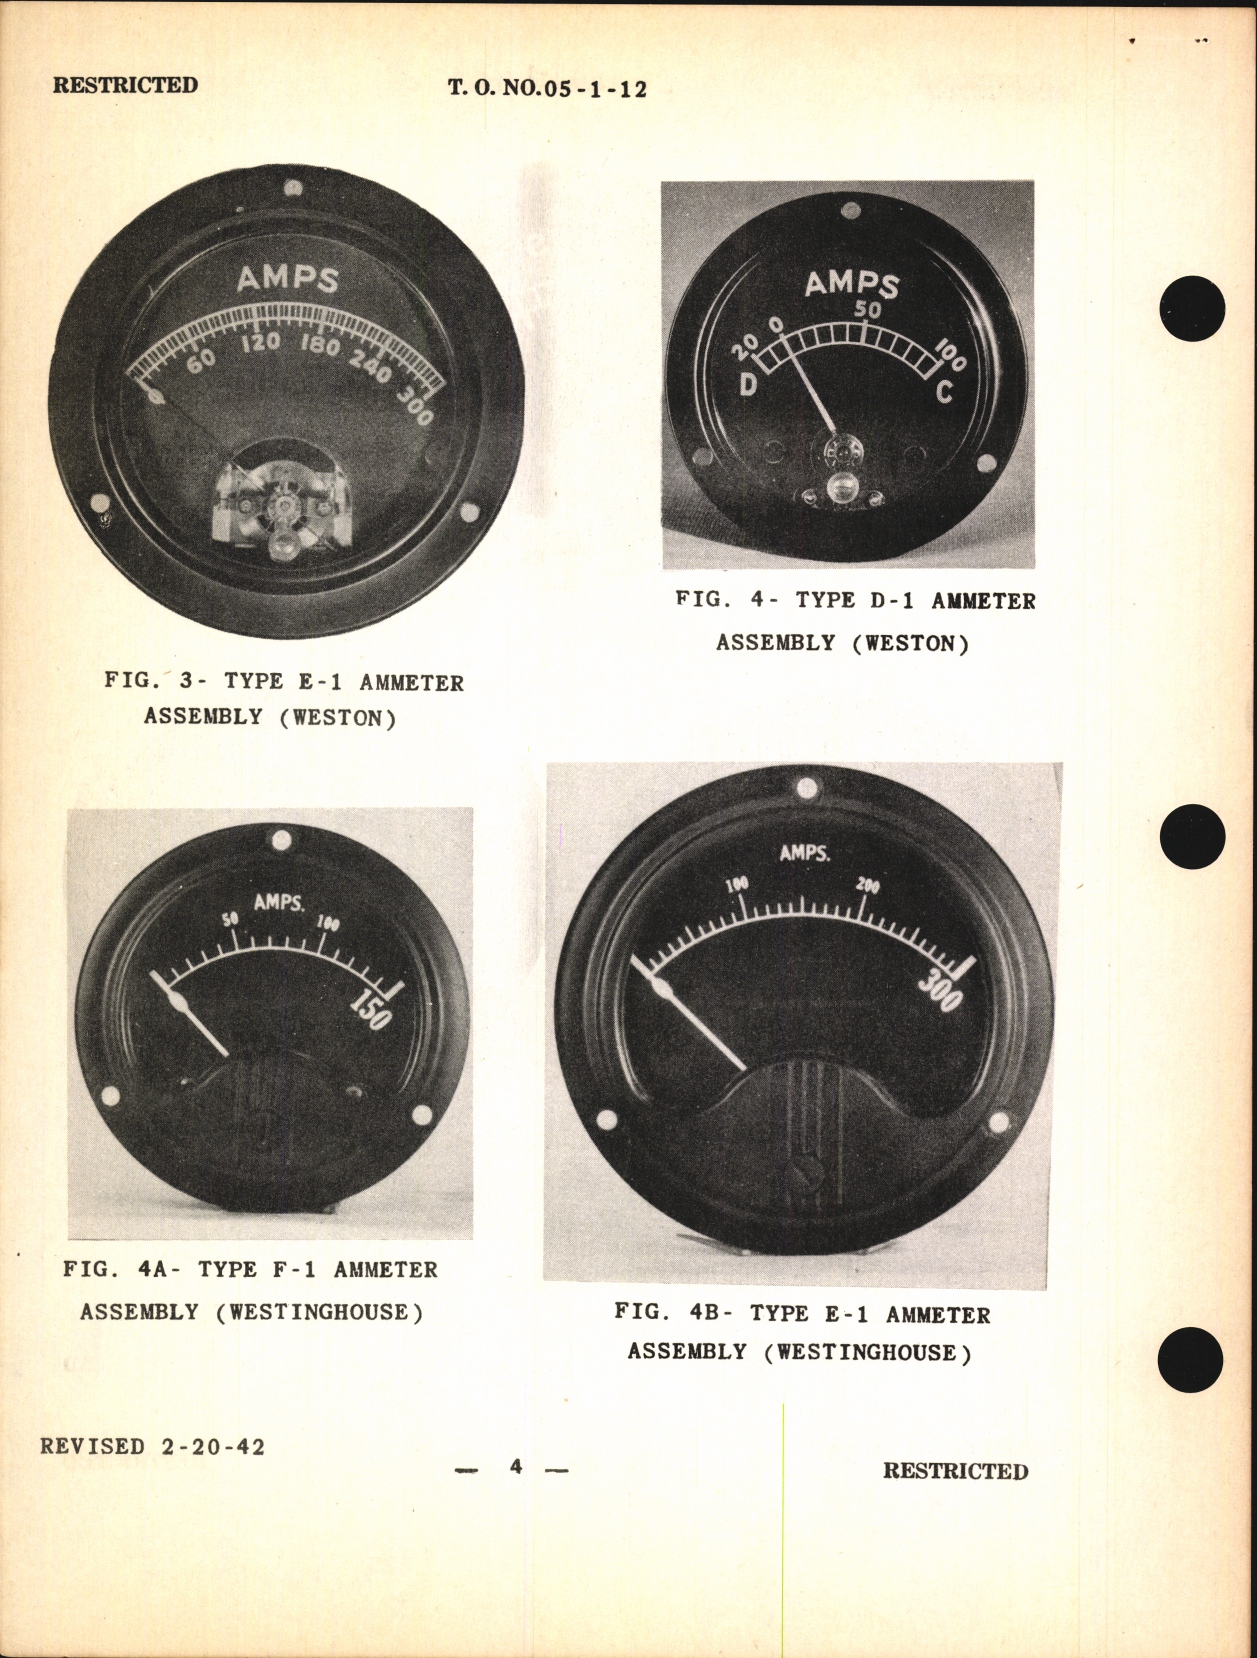 Sample page 6 from AirCorps Library document: Handbook of Service Instructions for Voltmeters, Ammeters, and Volt-Ammeters